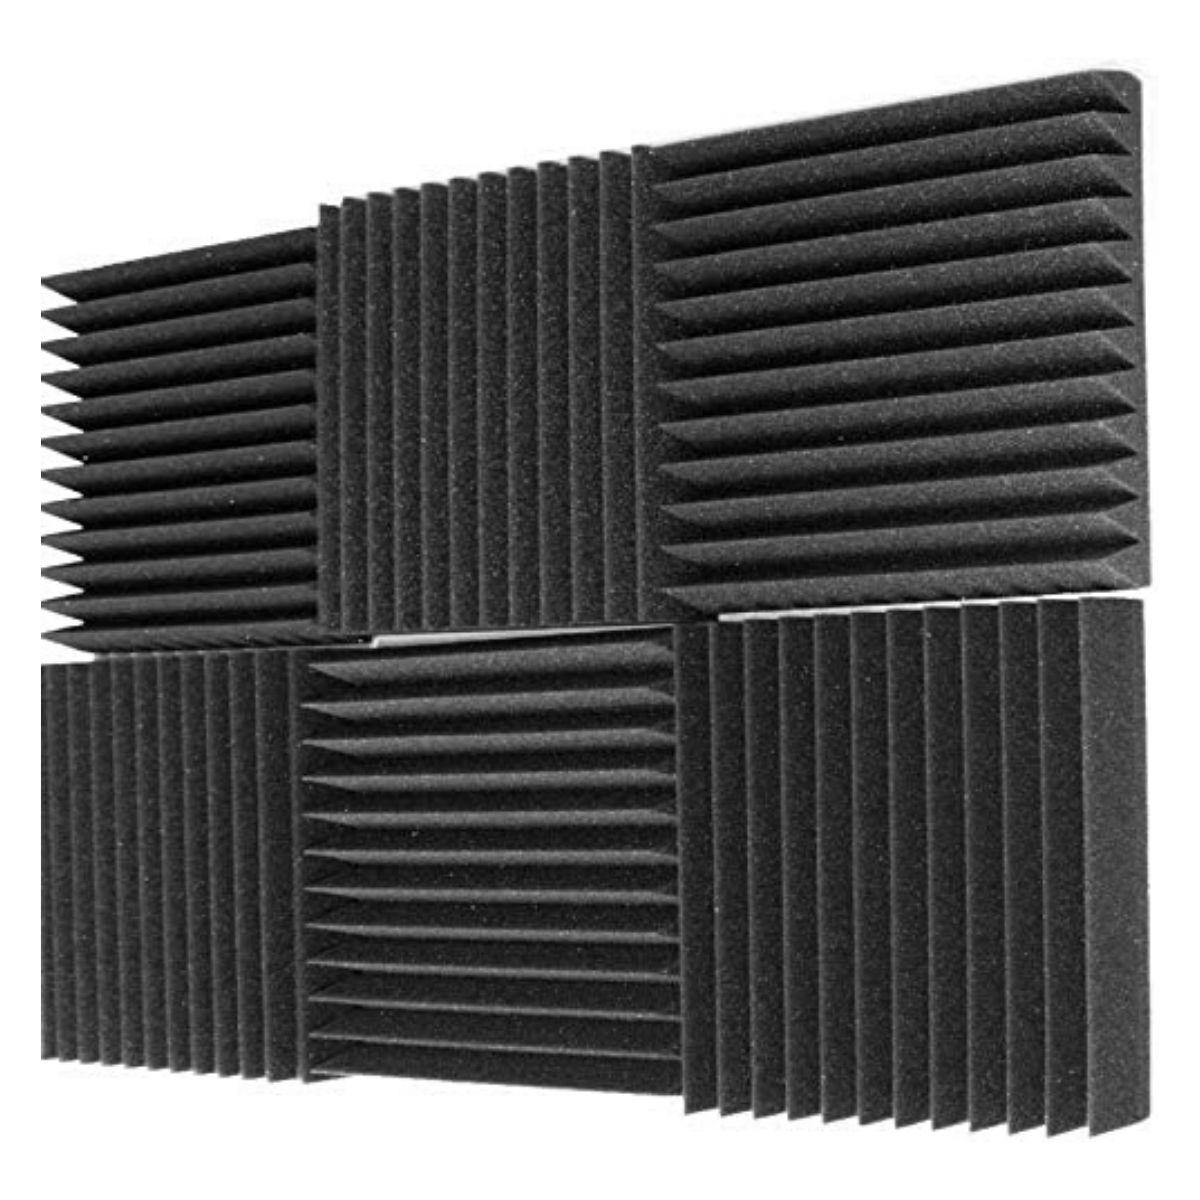 Cheap Soundproofing Materials: 10 Noise Reducing Materials That Work ...